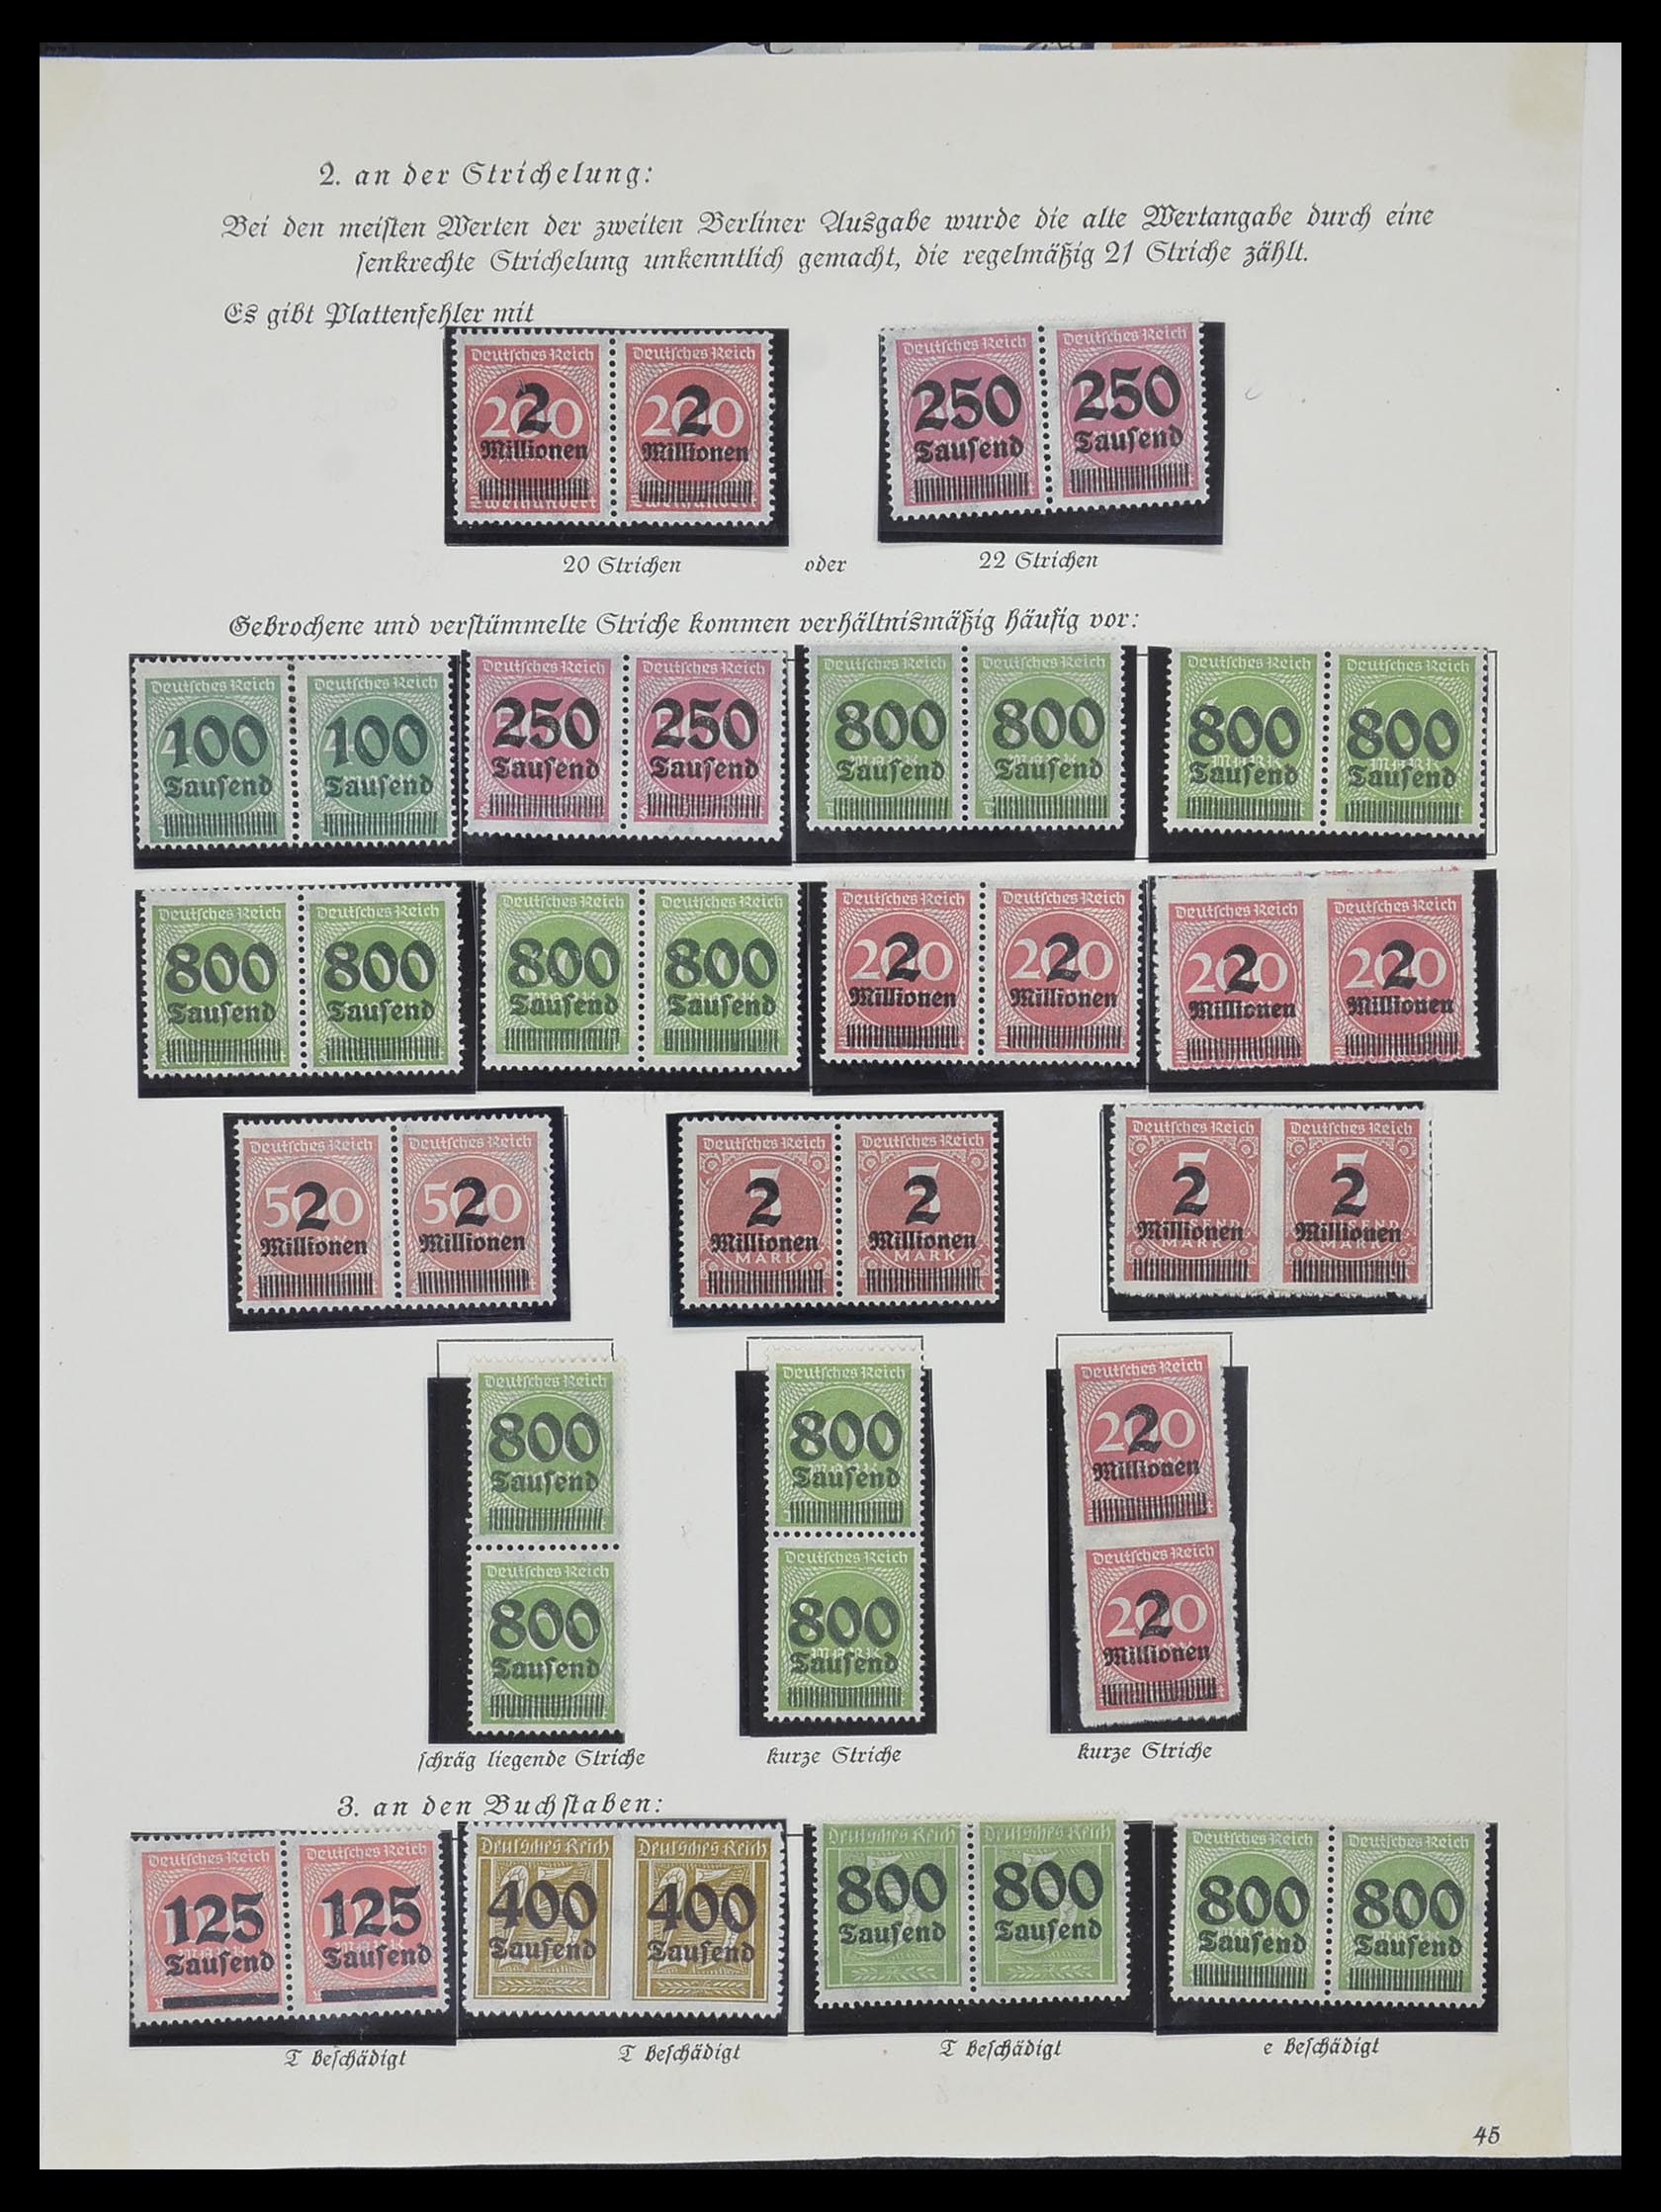 33957 021 - Stamp collection 33957 German Reich infla 1923.